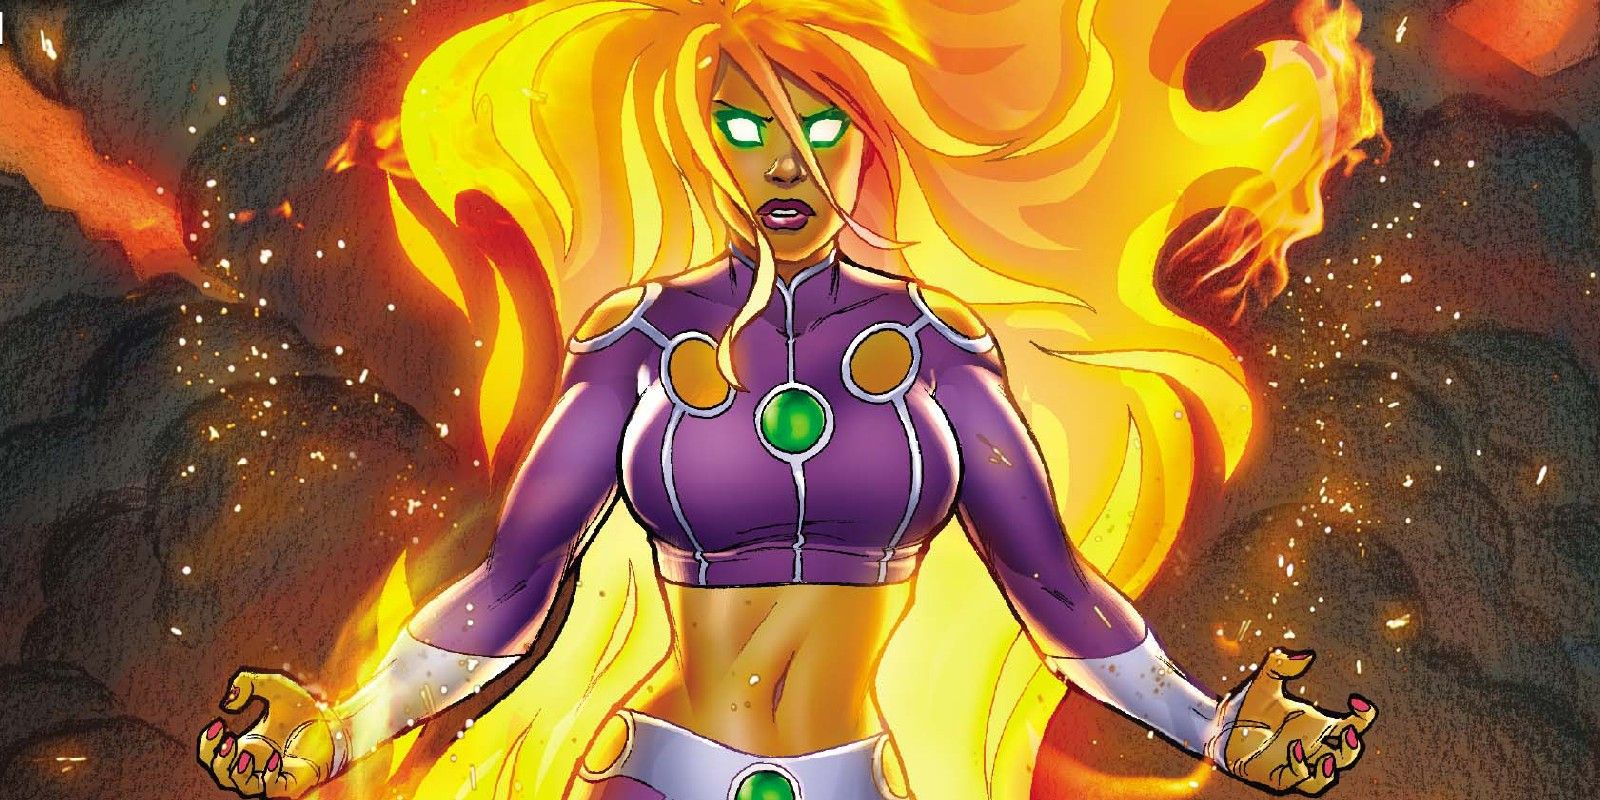 Starfire Glowing in Flames